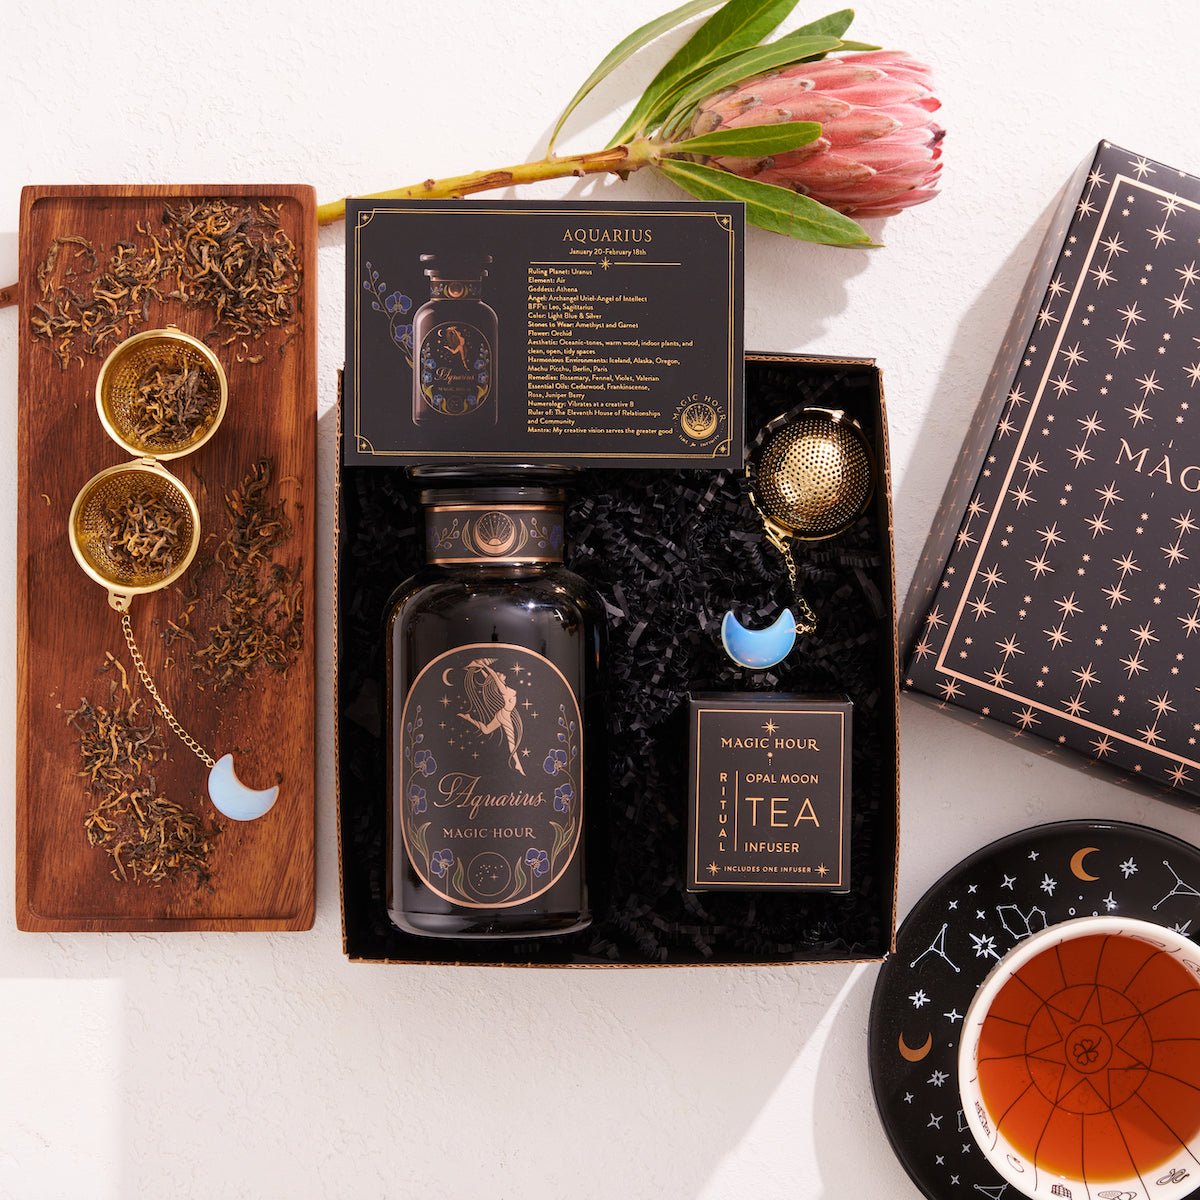 Astrology Sign Tea Apothecary Jar Gift Set-Aquarius: Violet Glass Apothecary Jar with Opalite Moon Tea Strainer-Magic Hour